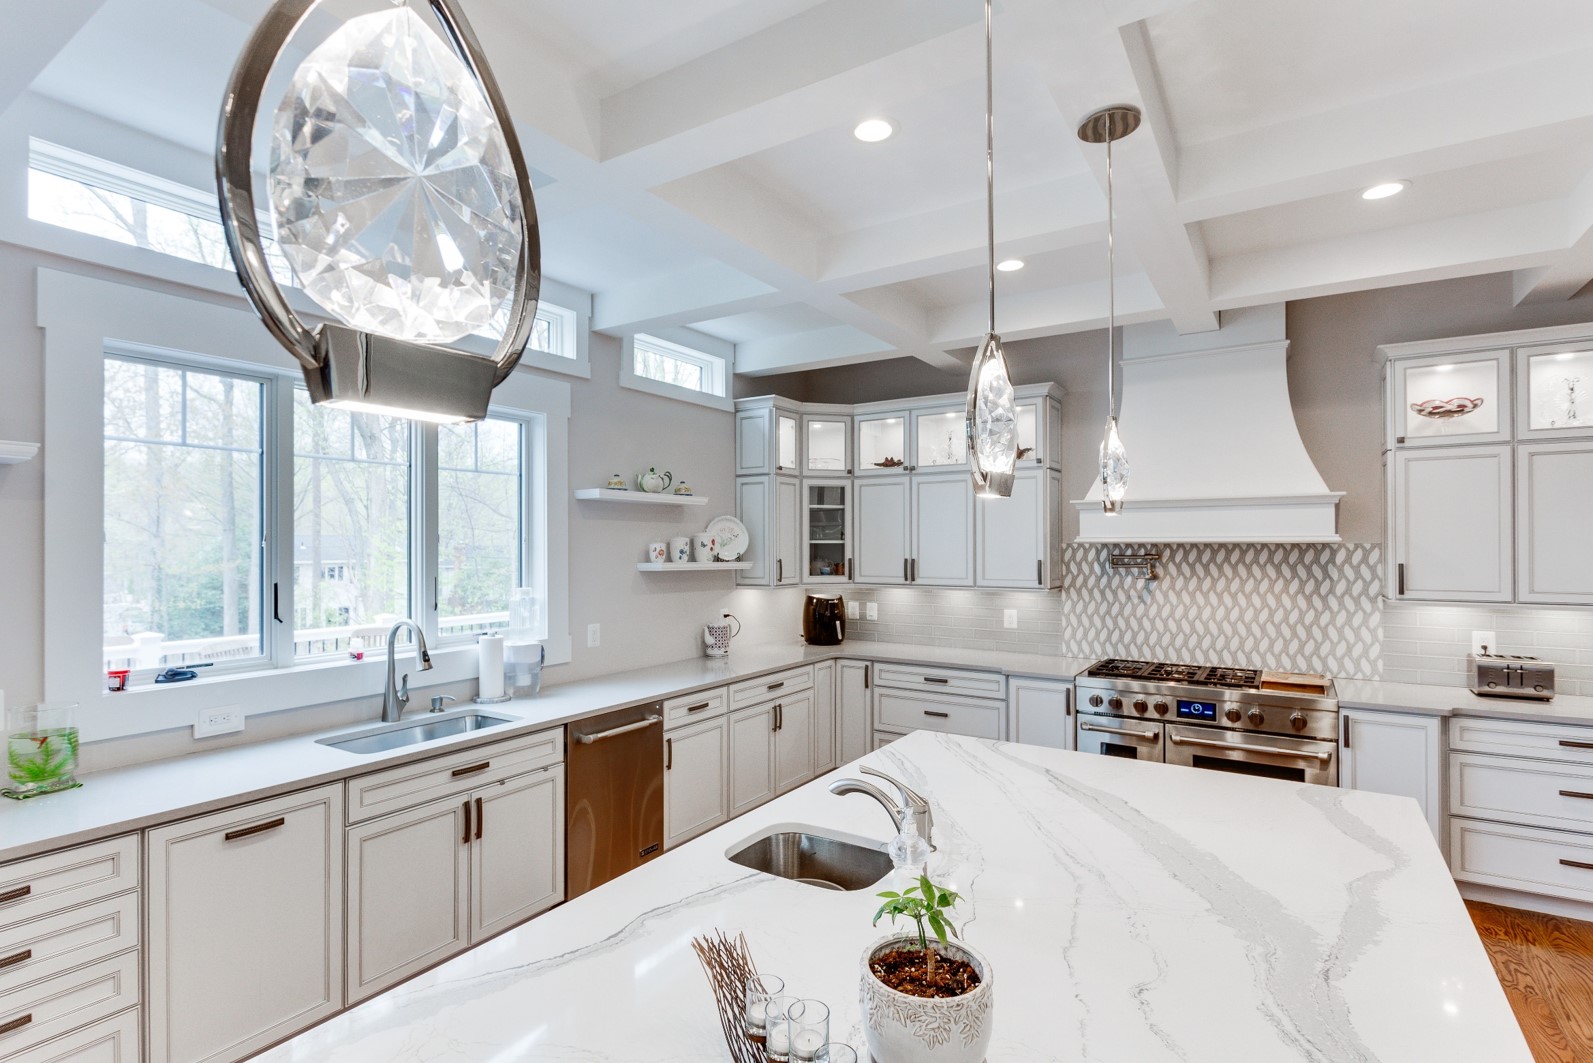 White and dark can bring out the light of the kitchen.